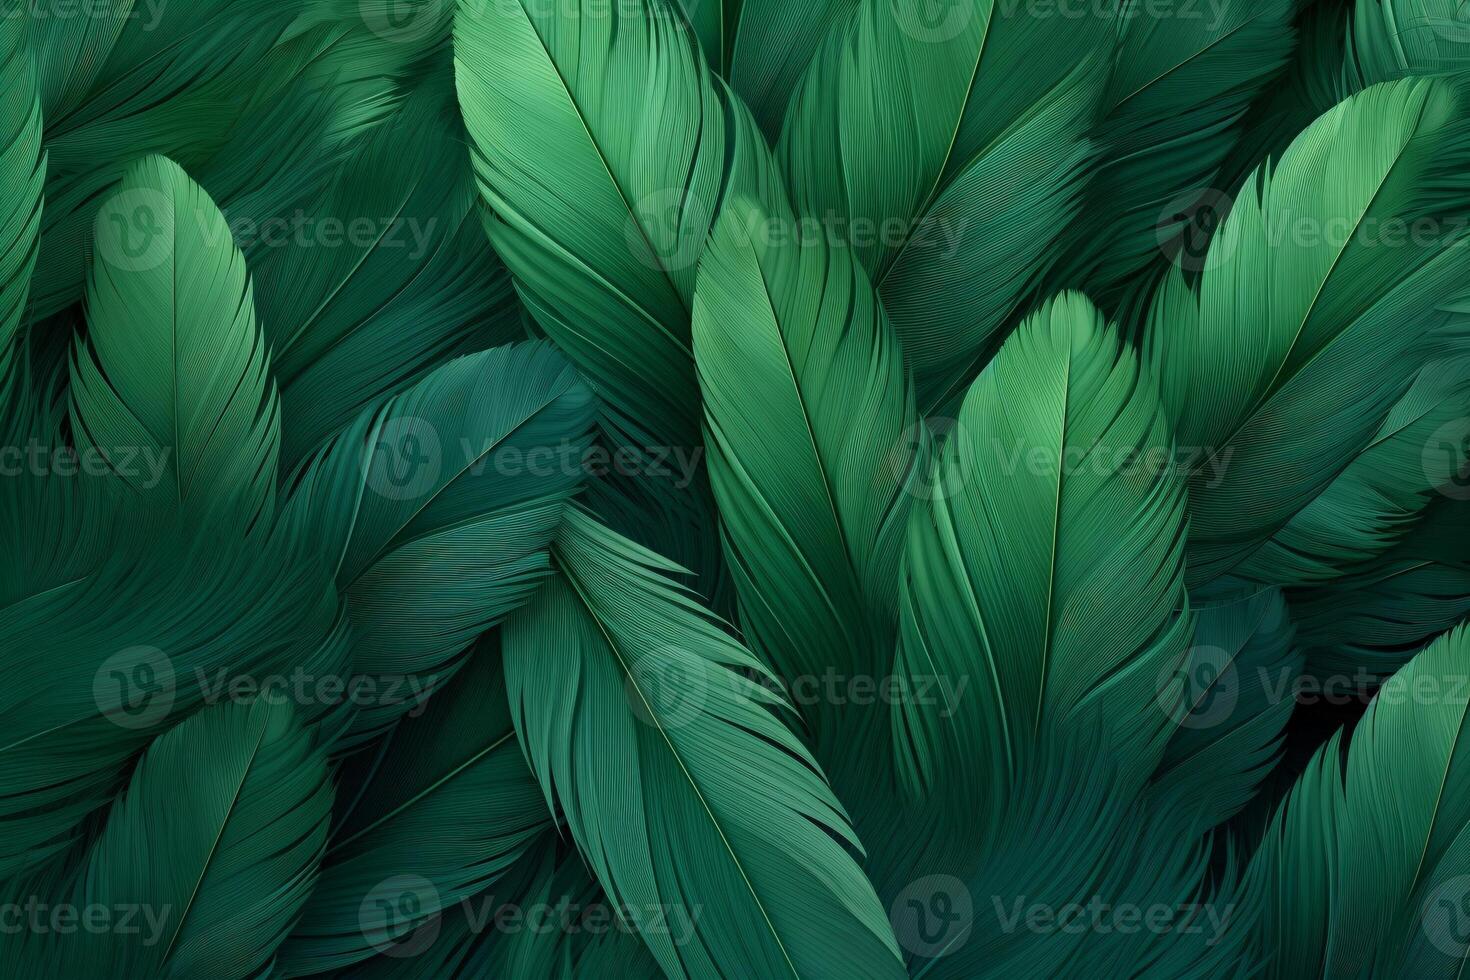 Green Feathers Background, Green Feathers Pattern, Feathers background, Feathers Wallpaper, bird feathers pattern, photo